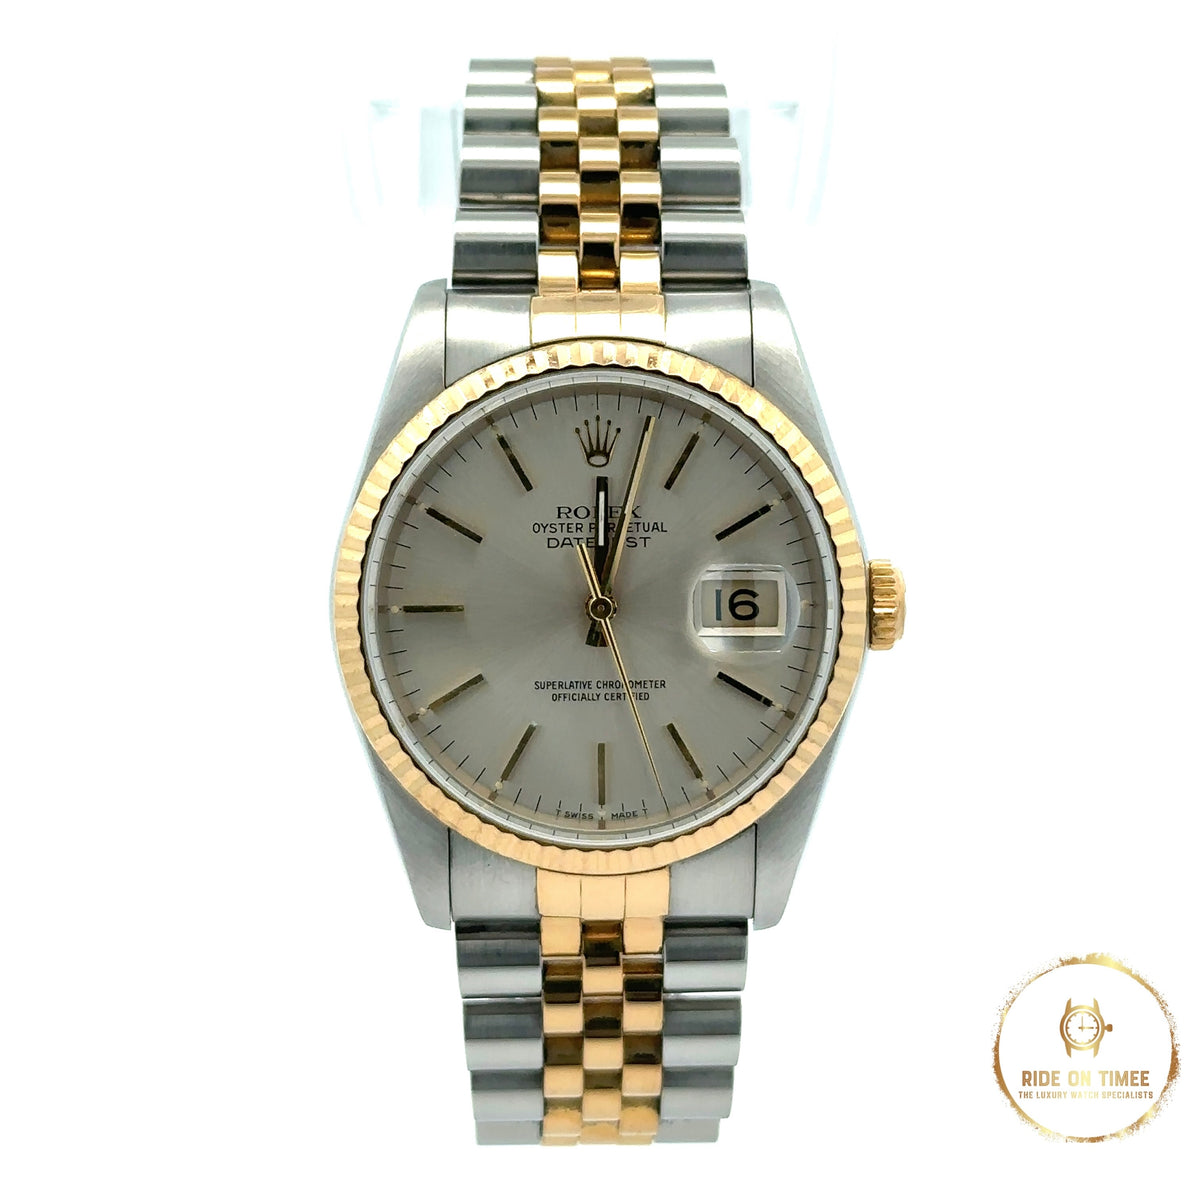 Rolex Datejust 36mm Factory Silver Baton Dial ‘16233’ - Ride On Timee